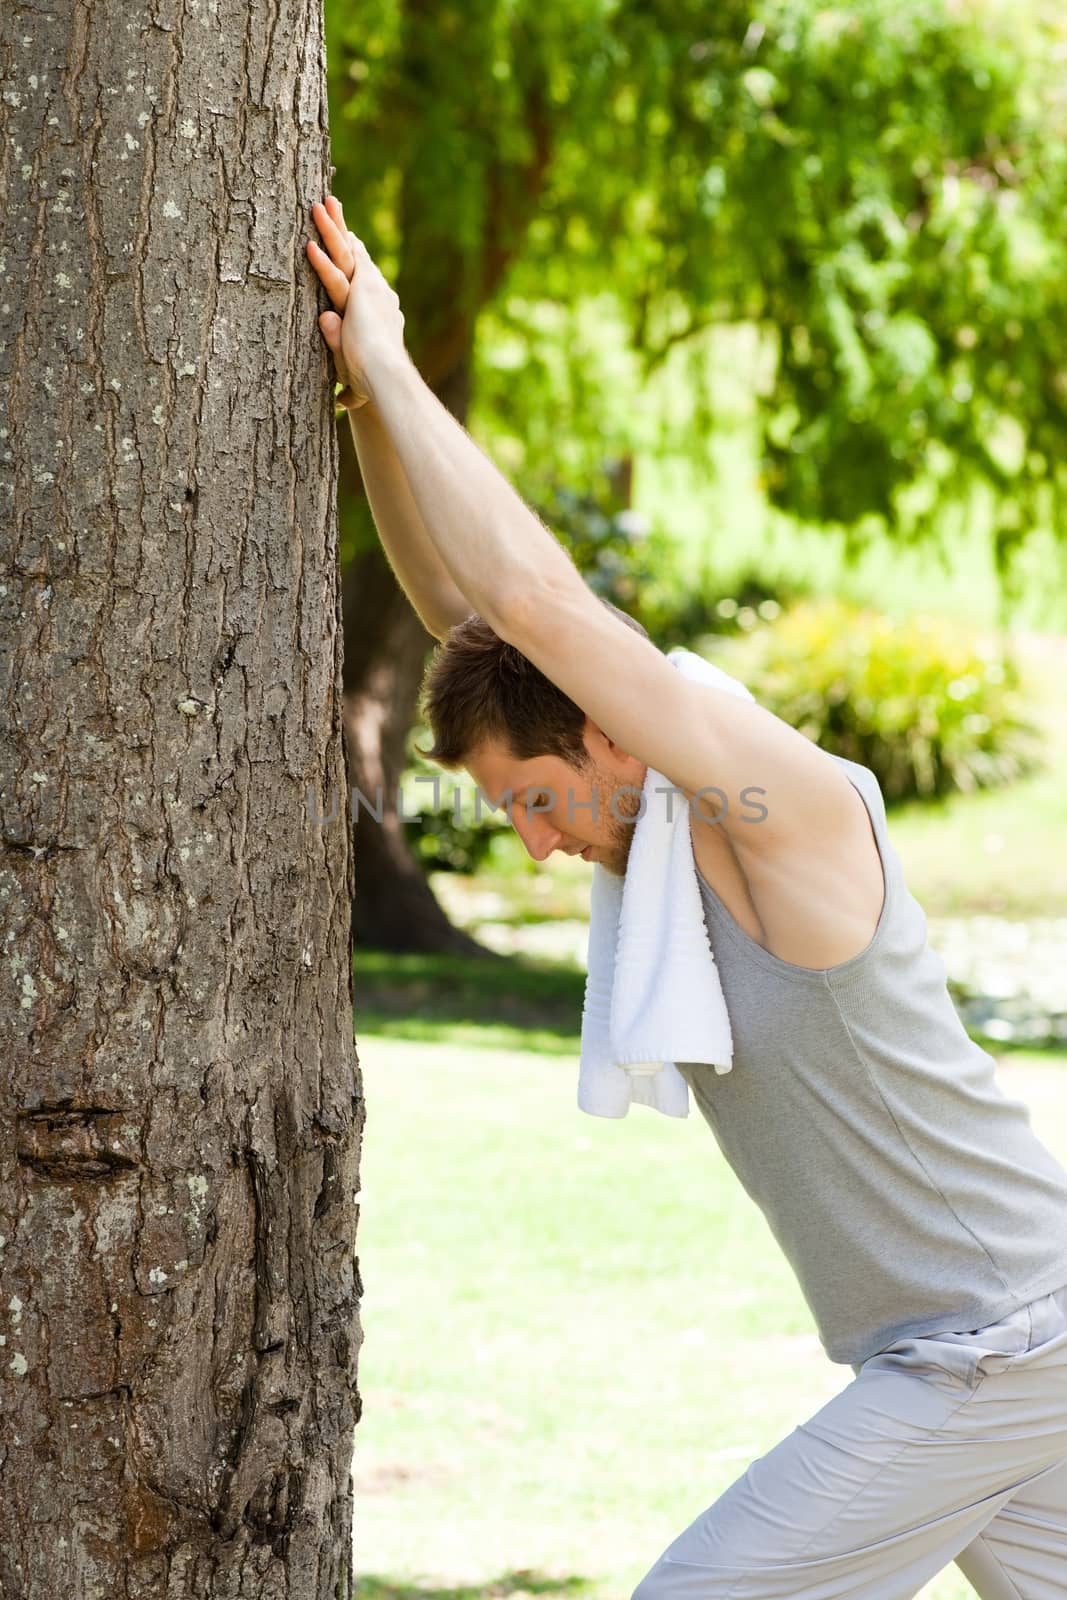 Man doing his stretches in the park during the summer